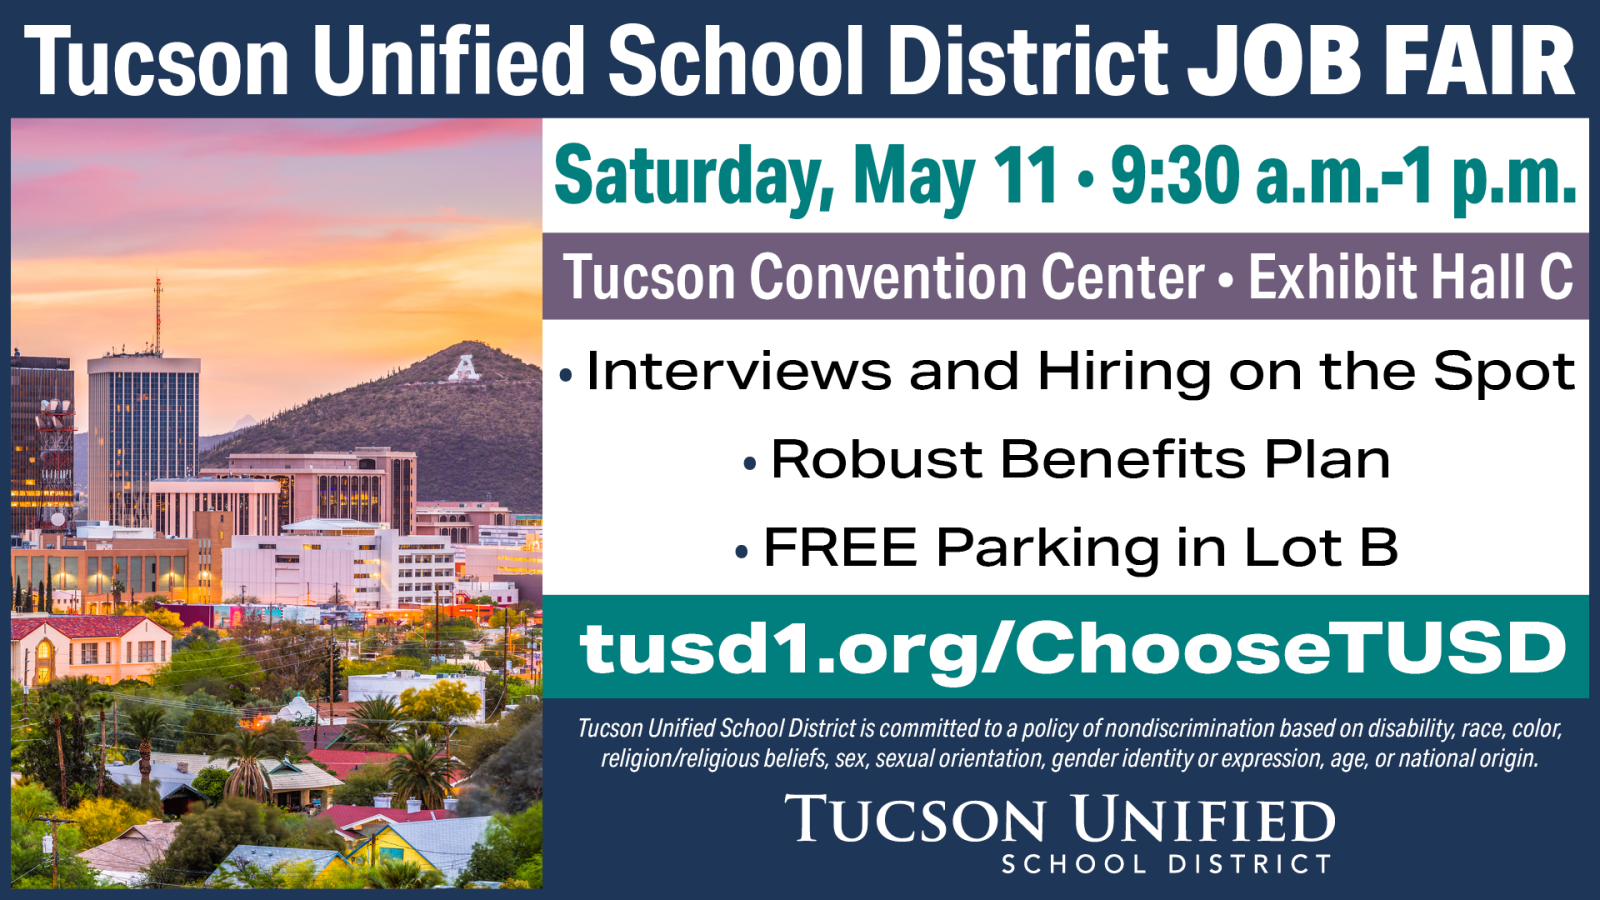 Join us on Saturday May 11 from 9:30 am - 1:00 pm at the Tucson Convention Center Exhibit Hall C (260 S. Church Ave.) for the Tucson Unified School District Job Fair!  Interviews and Hiring on the Spot Robust Benefits Plan FREE Parking in Lot B  